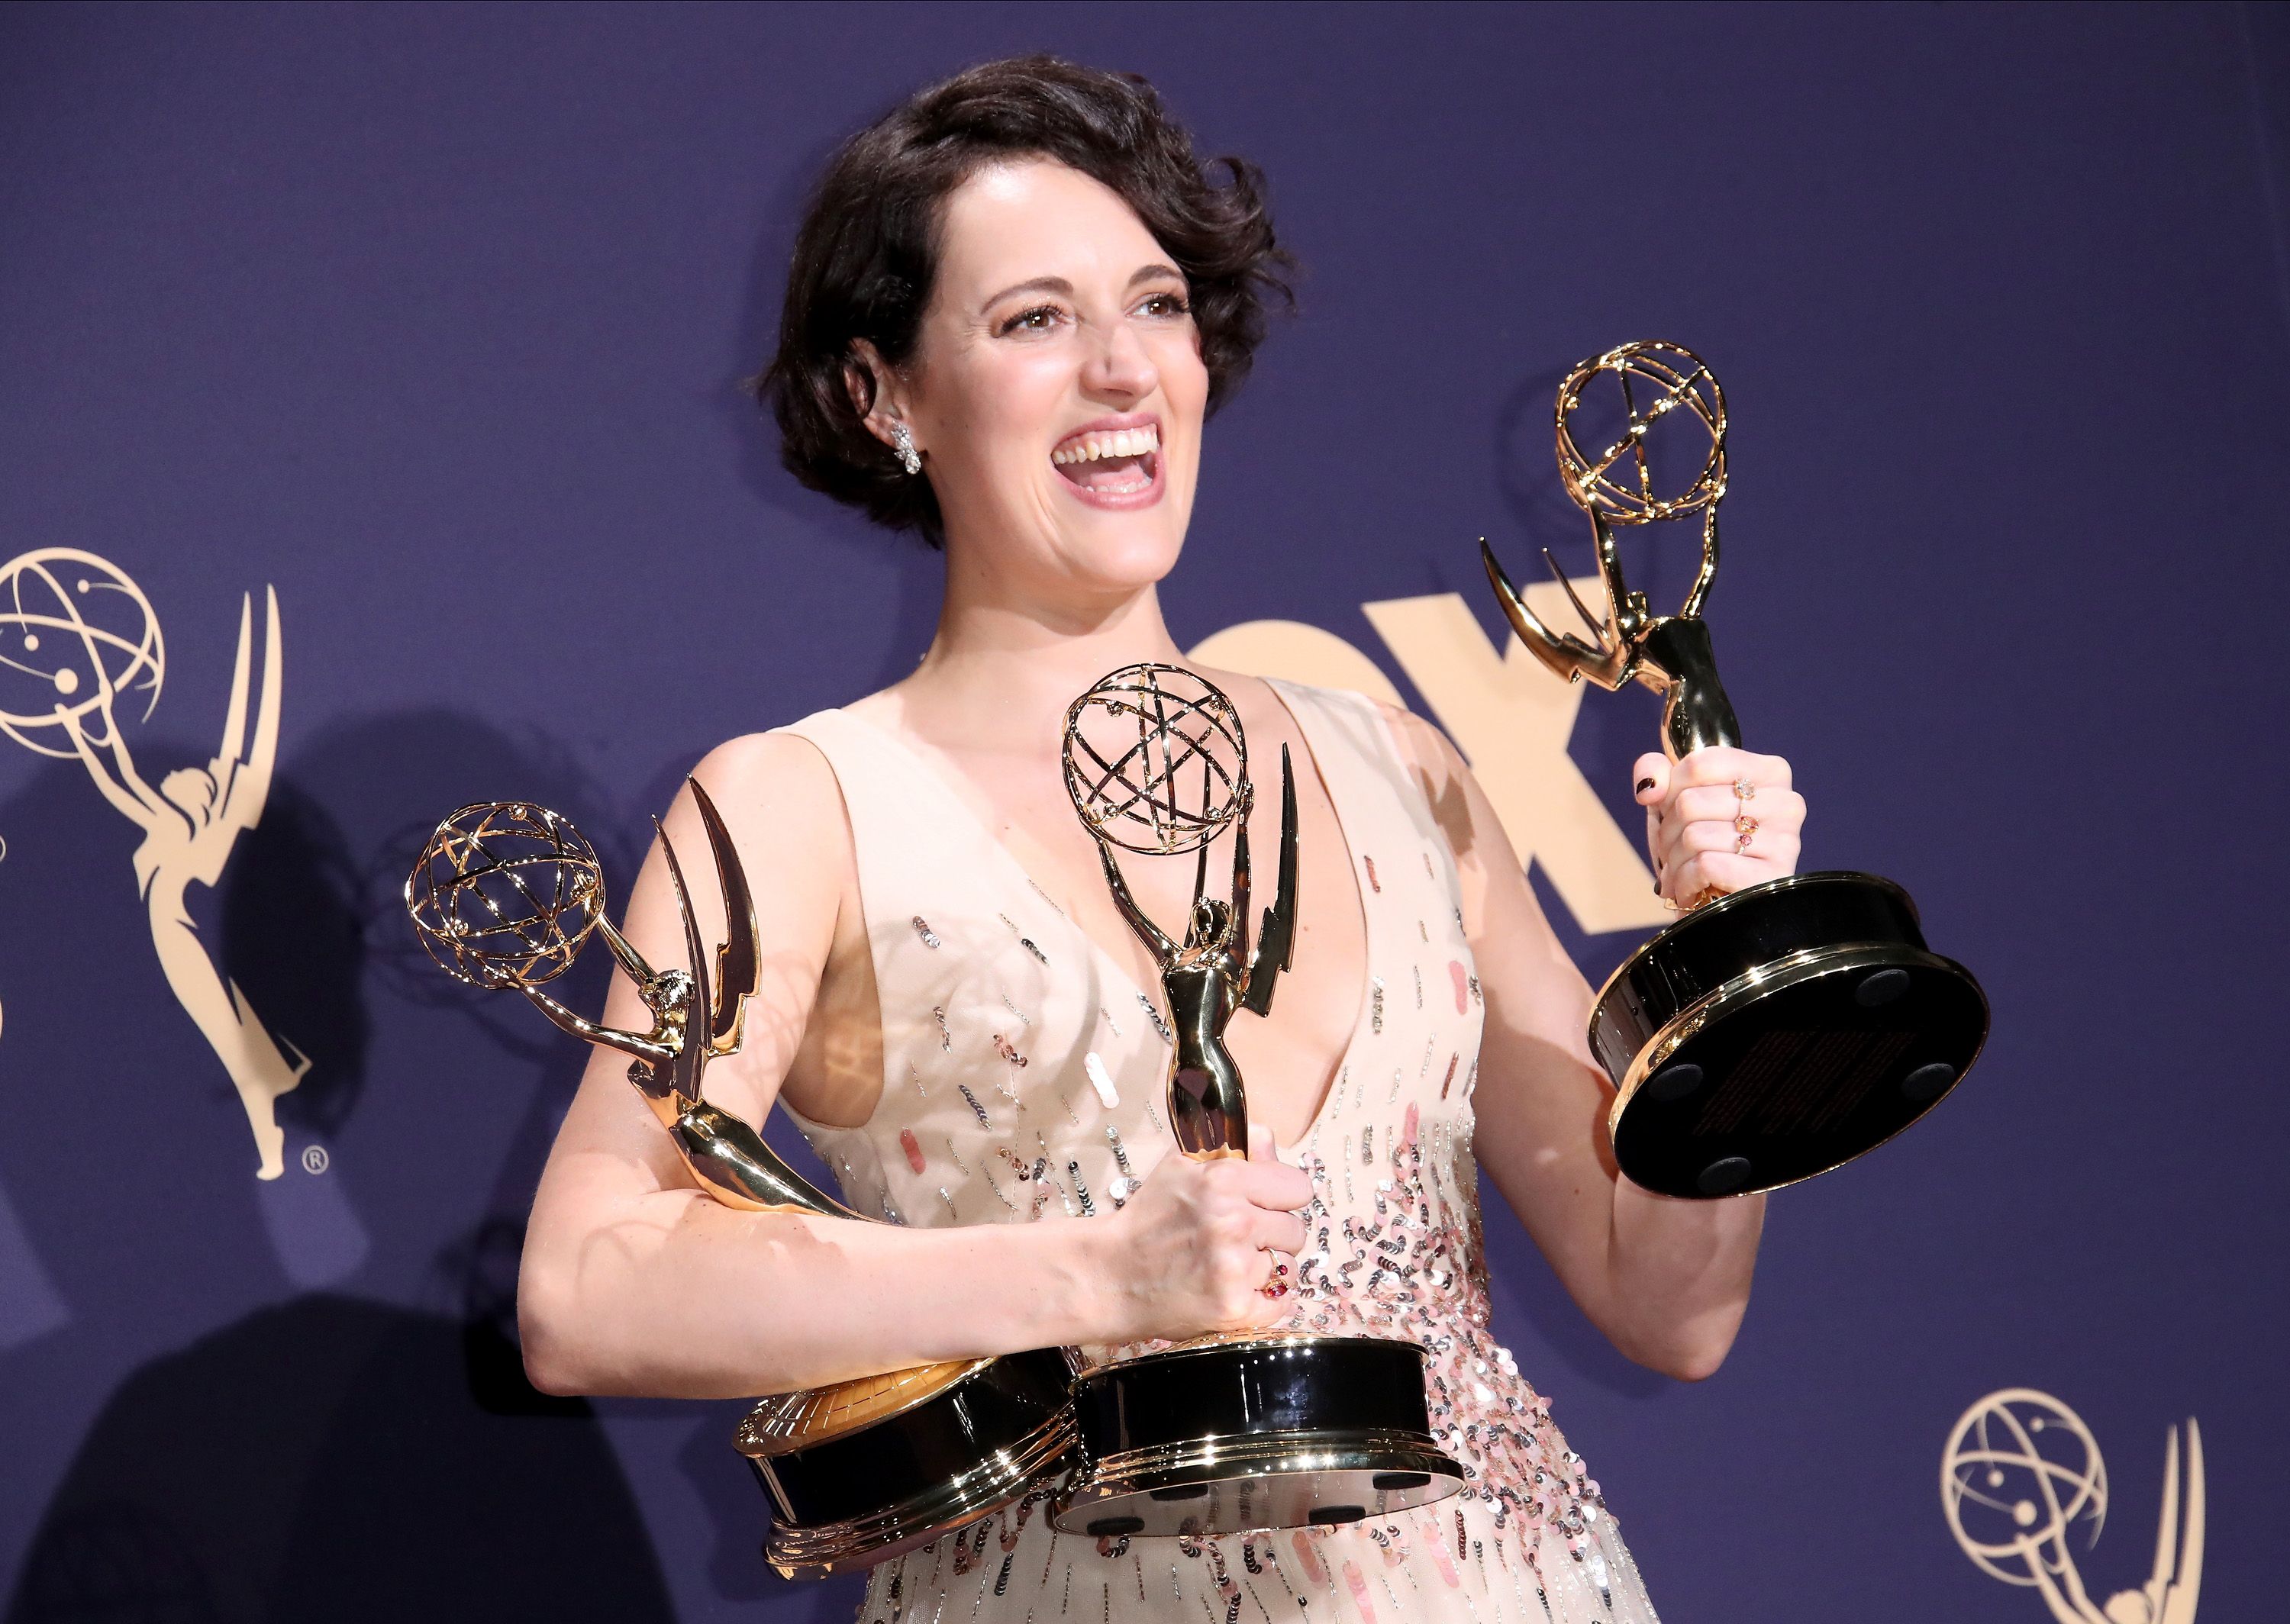 phoebe-waller-bridge-poses-with-awards-for-outstanding-news-photo-1569840880.jpg